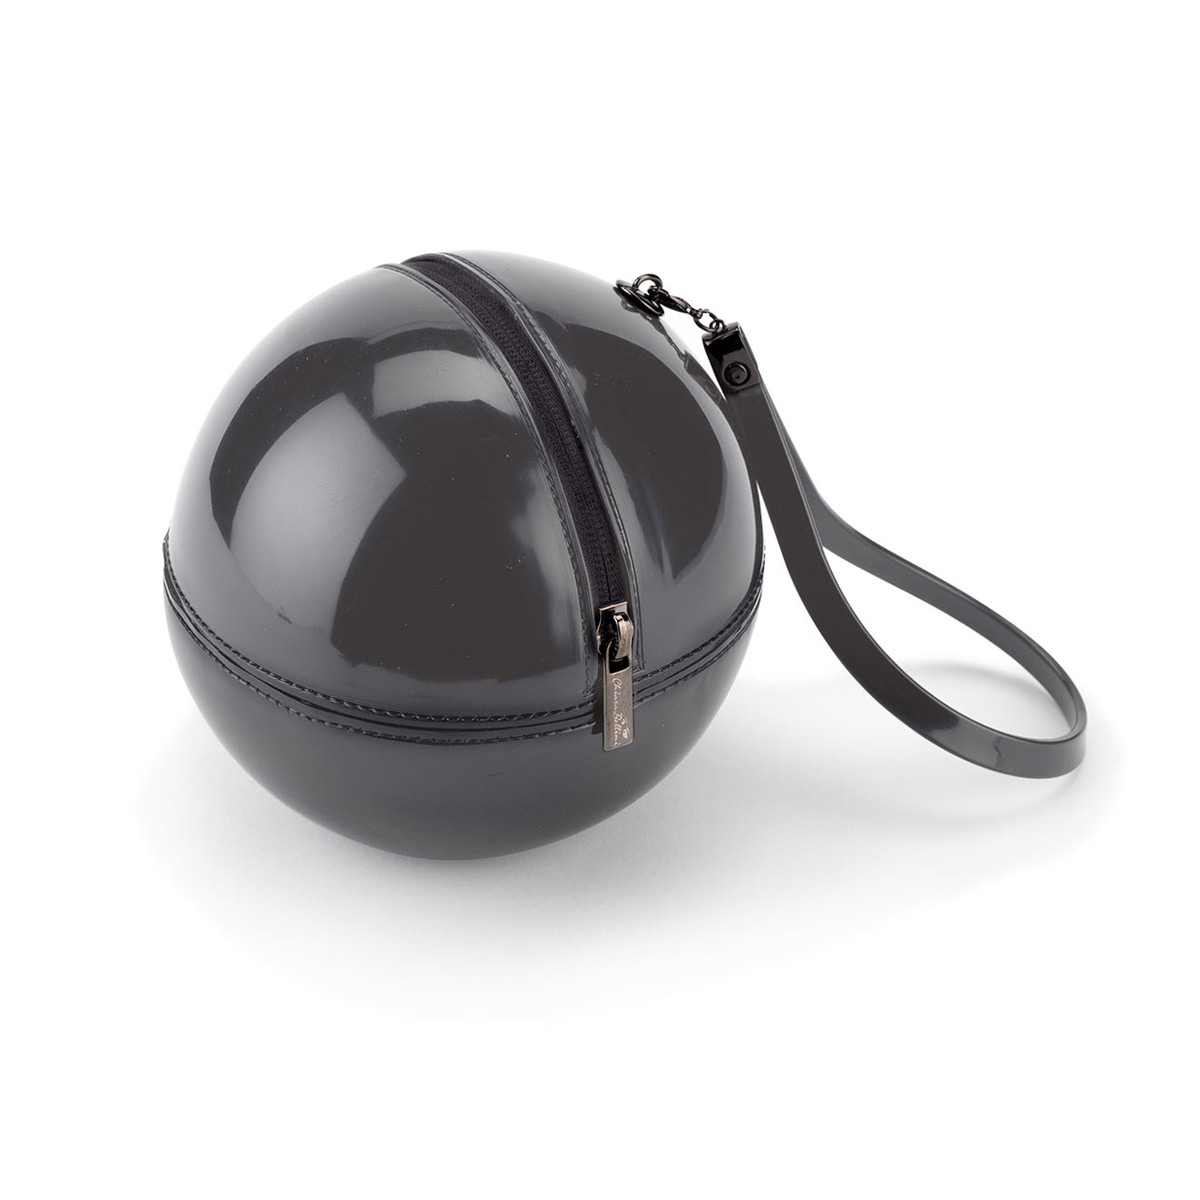 "Rock'n ball" sphere bag in solid colour bright PVC